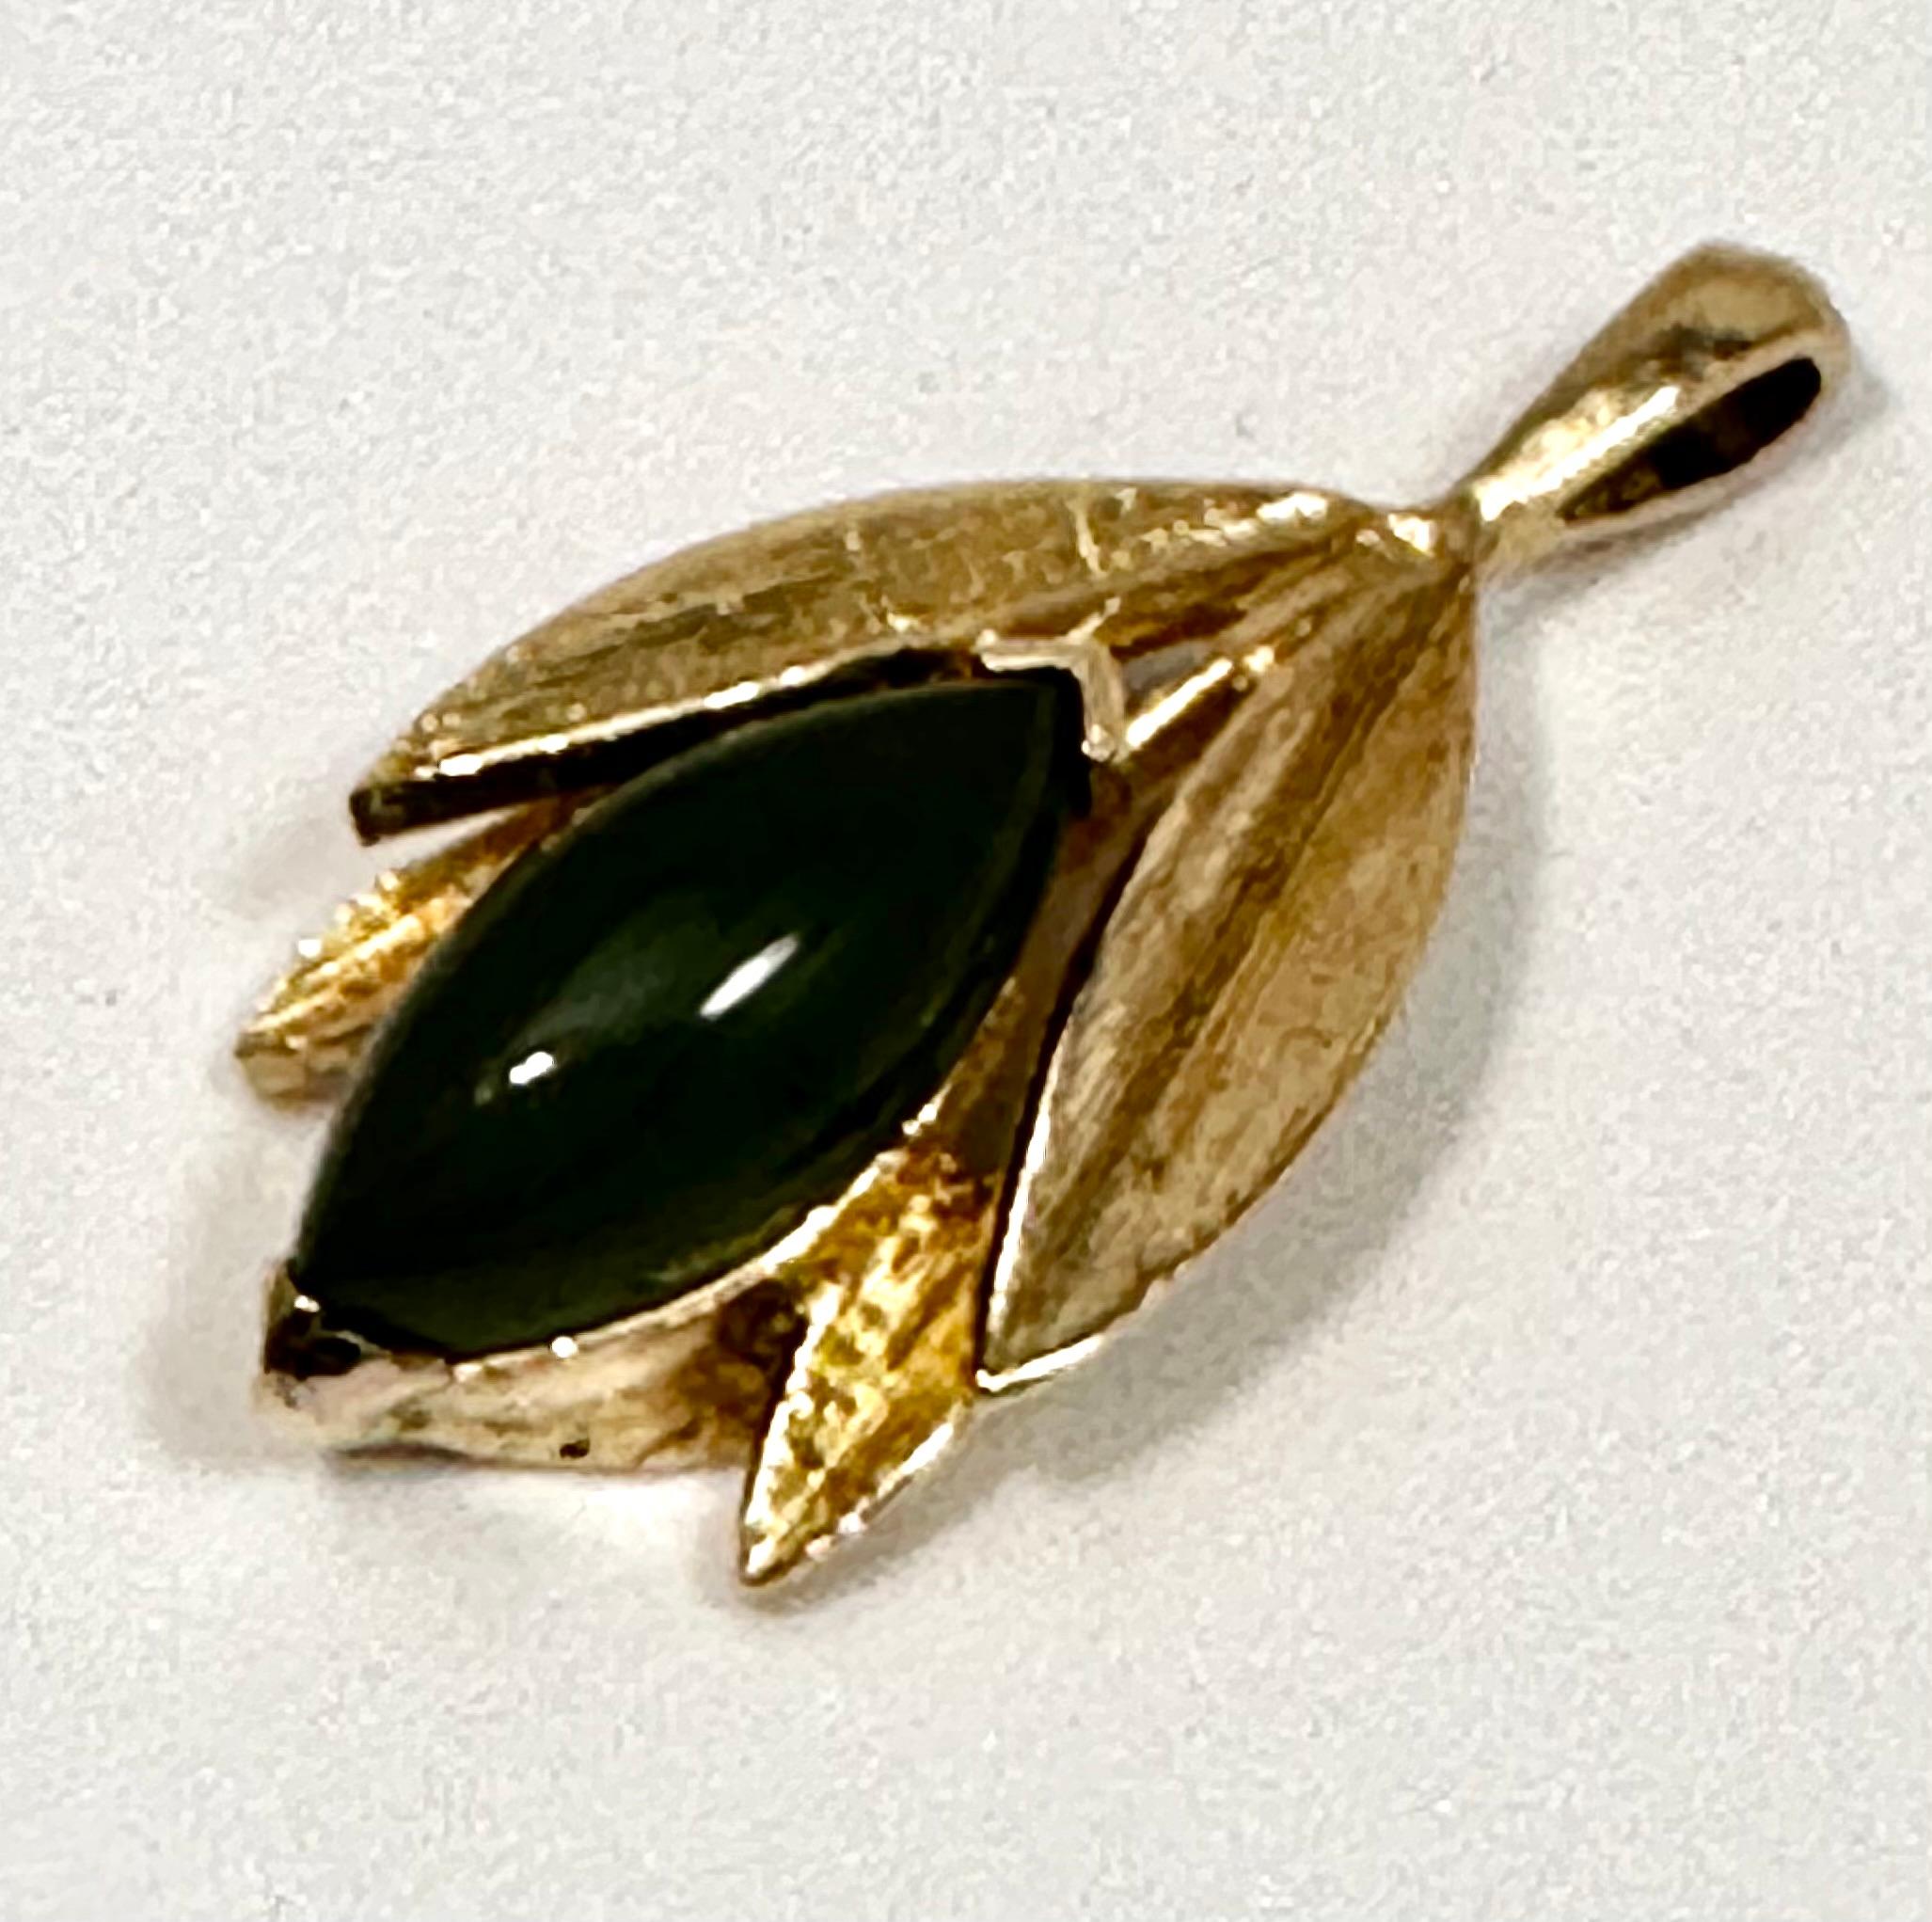 Vintage 14k Yellow Gold 7mm x 14mm Marquise Shaped Green Jade Pendant
Pendant measures approx .55